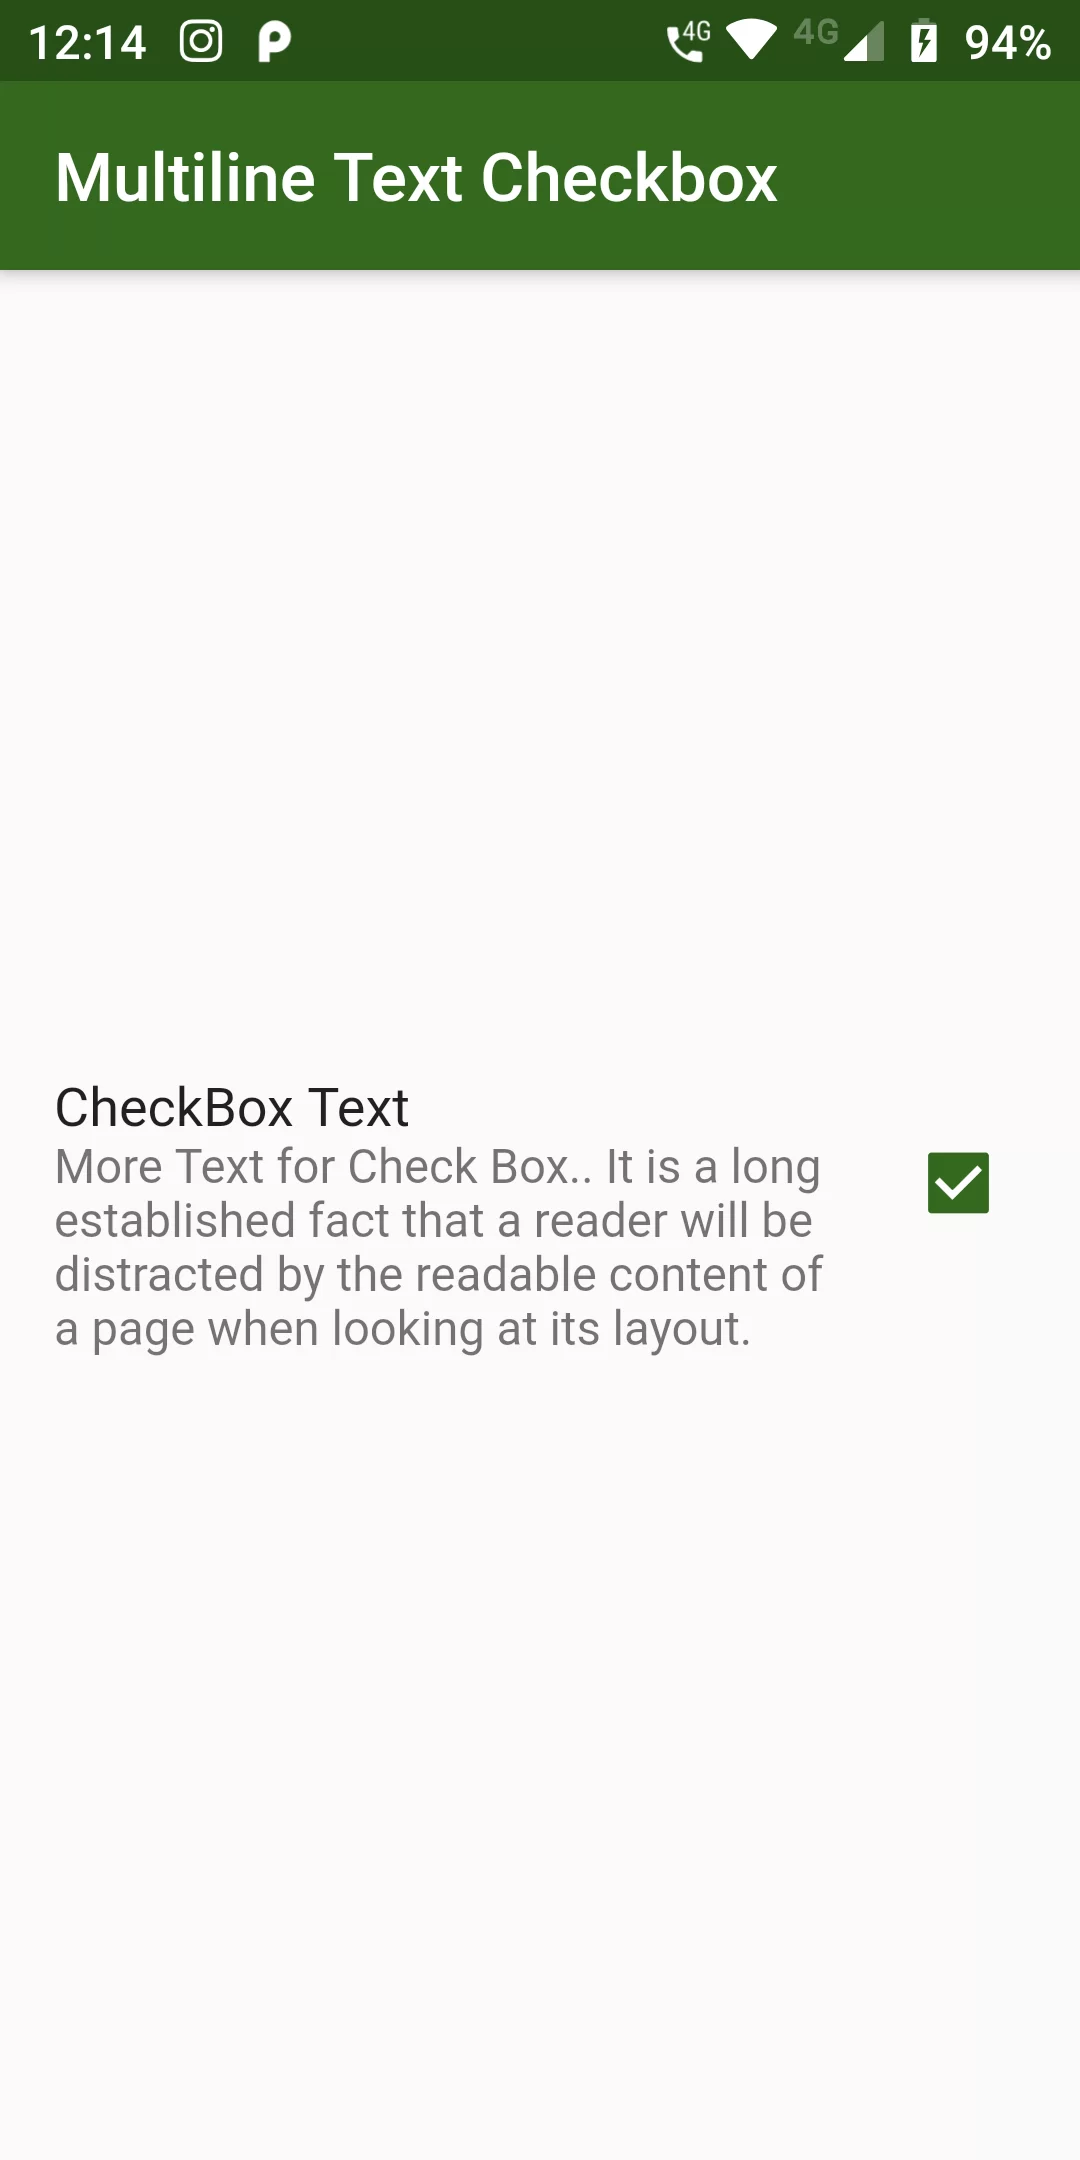 How To Create Multiline Text Checkbox Using Flutter Android App